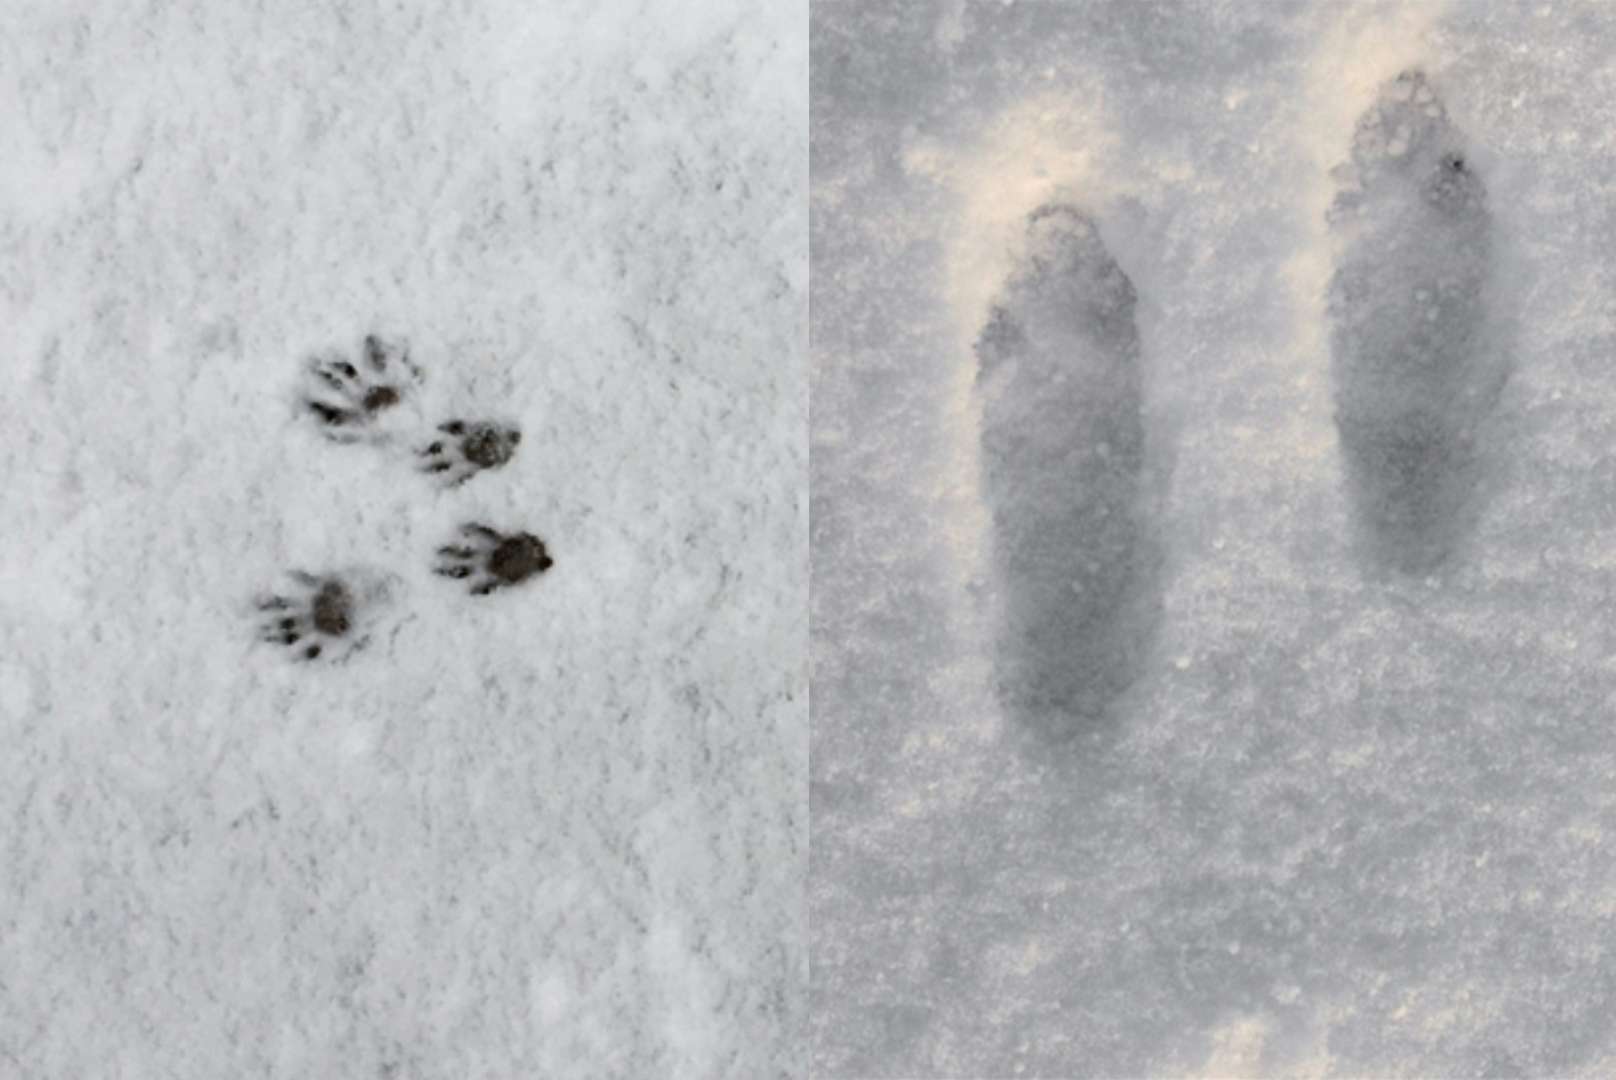 Rabbit and Squirrel Tracks Differences